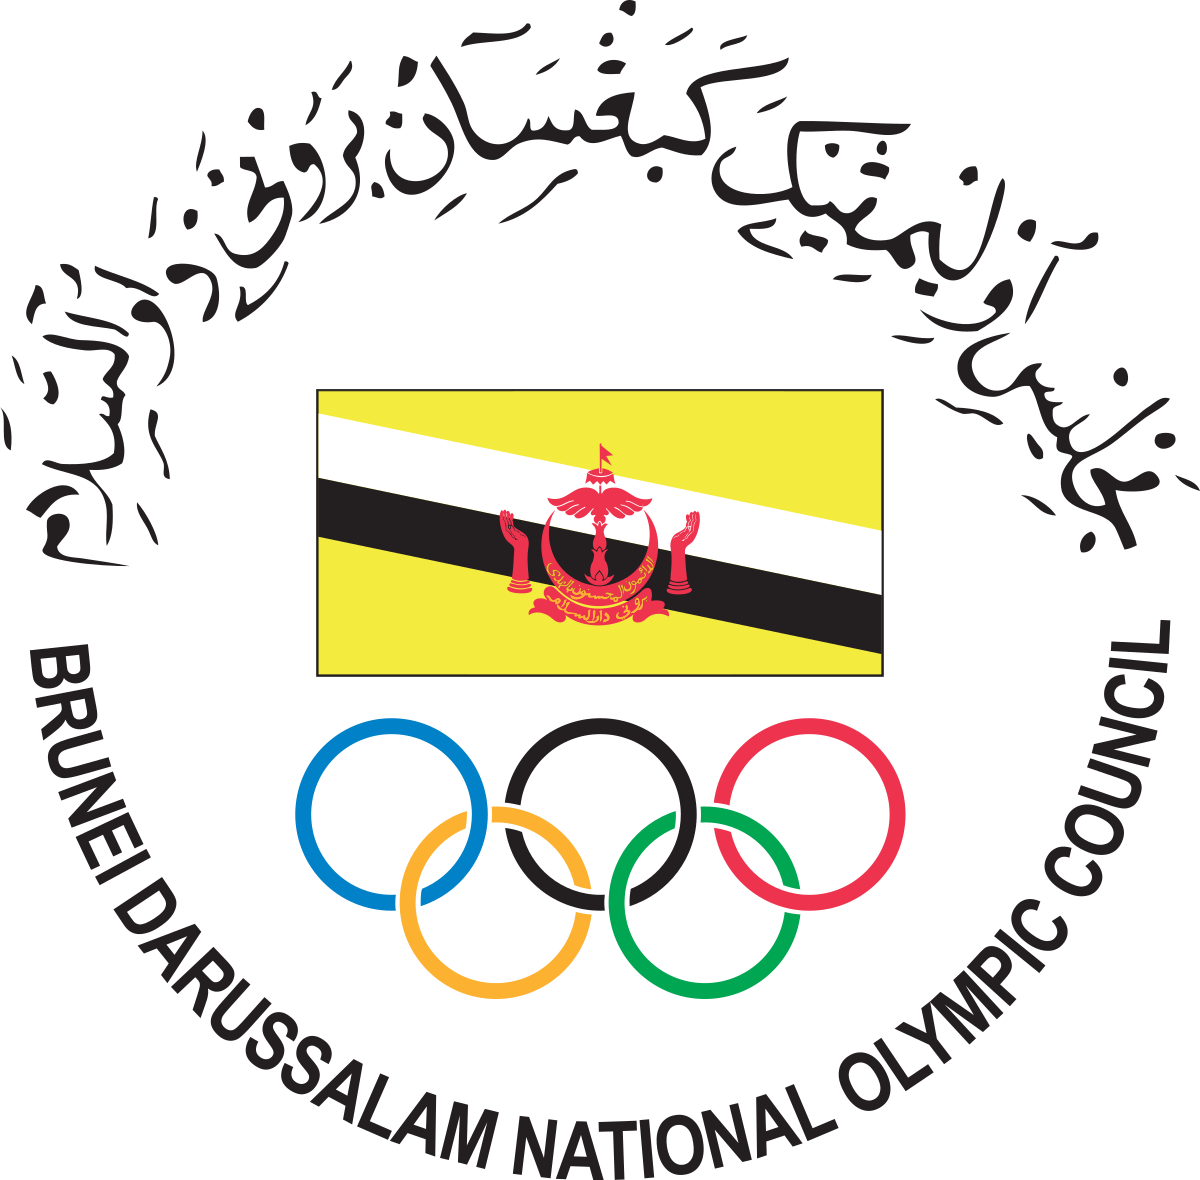 Brunei_Darussalam_National_Olympic_Council_logo.svg.png